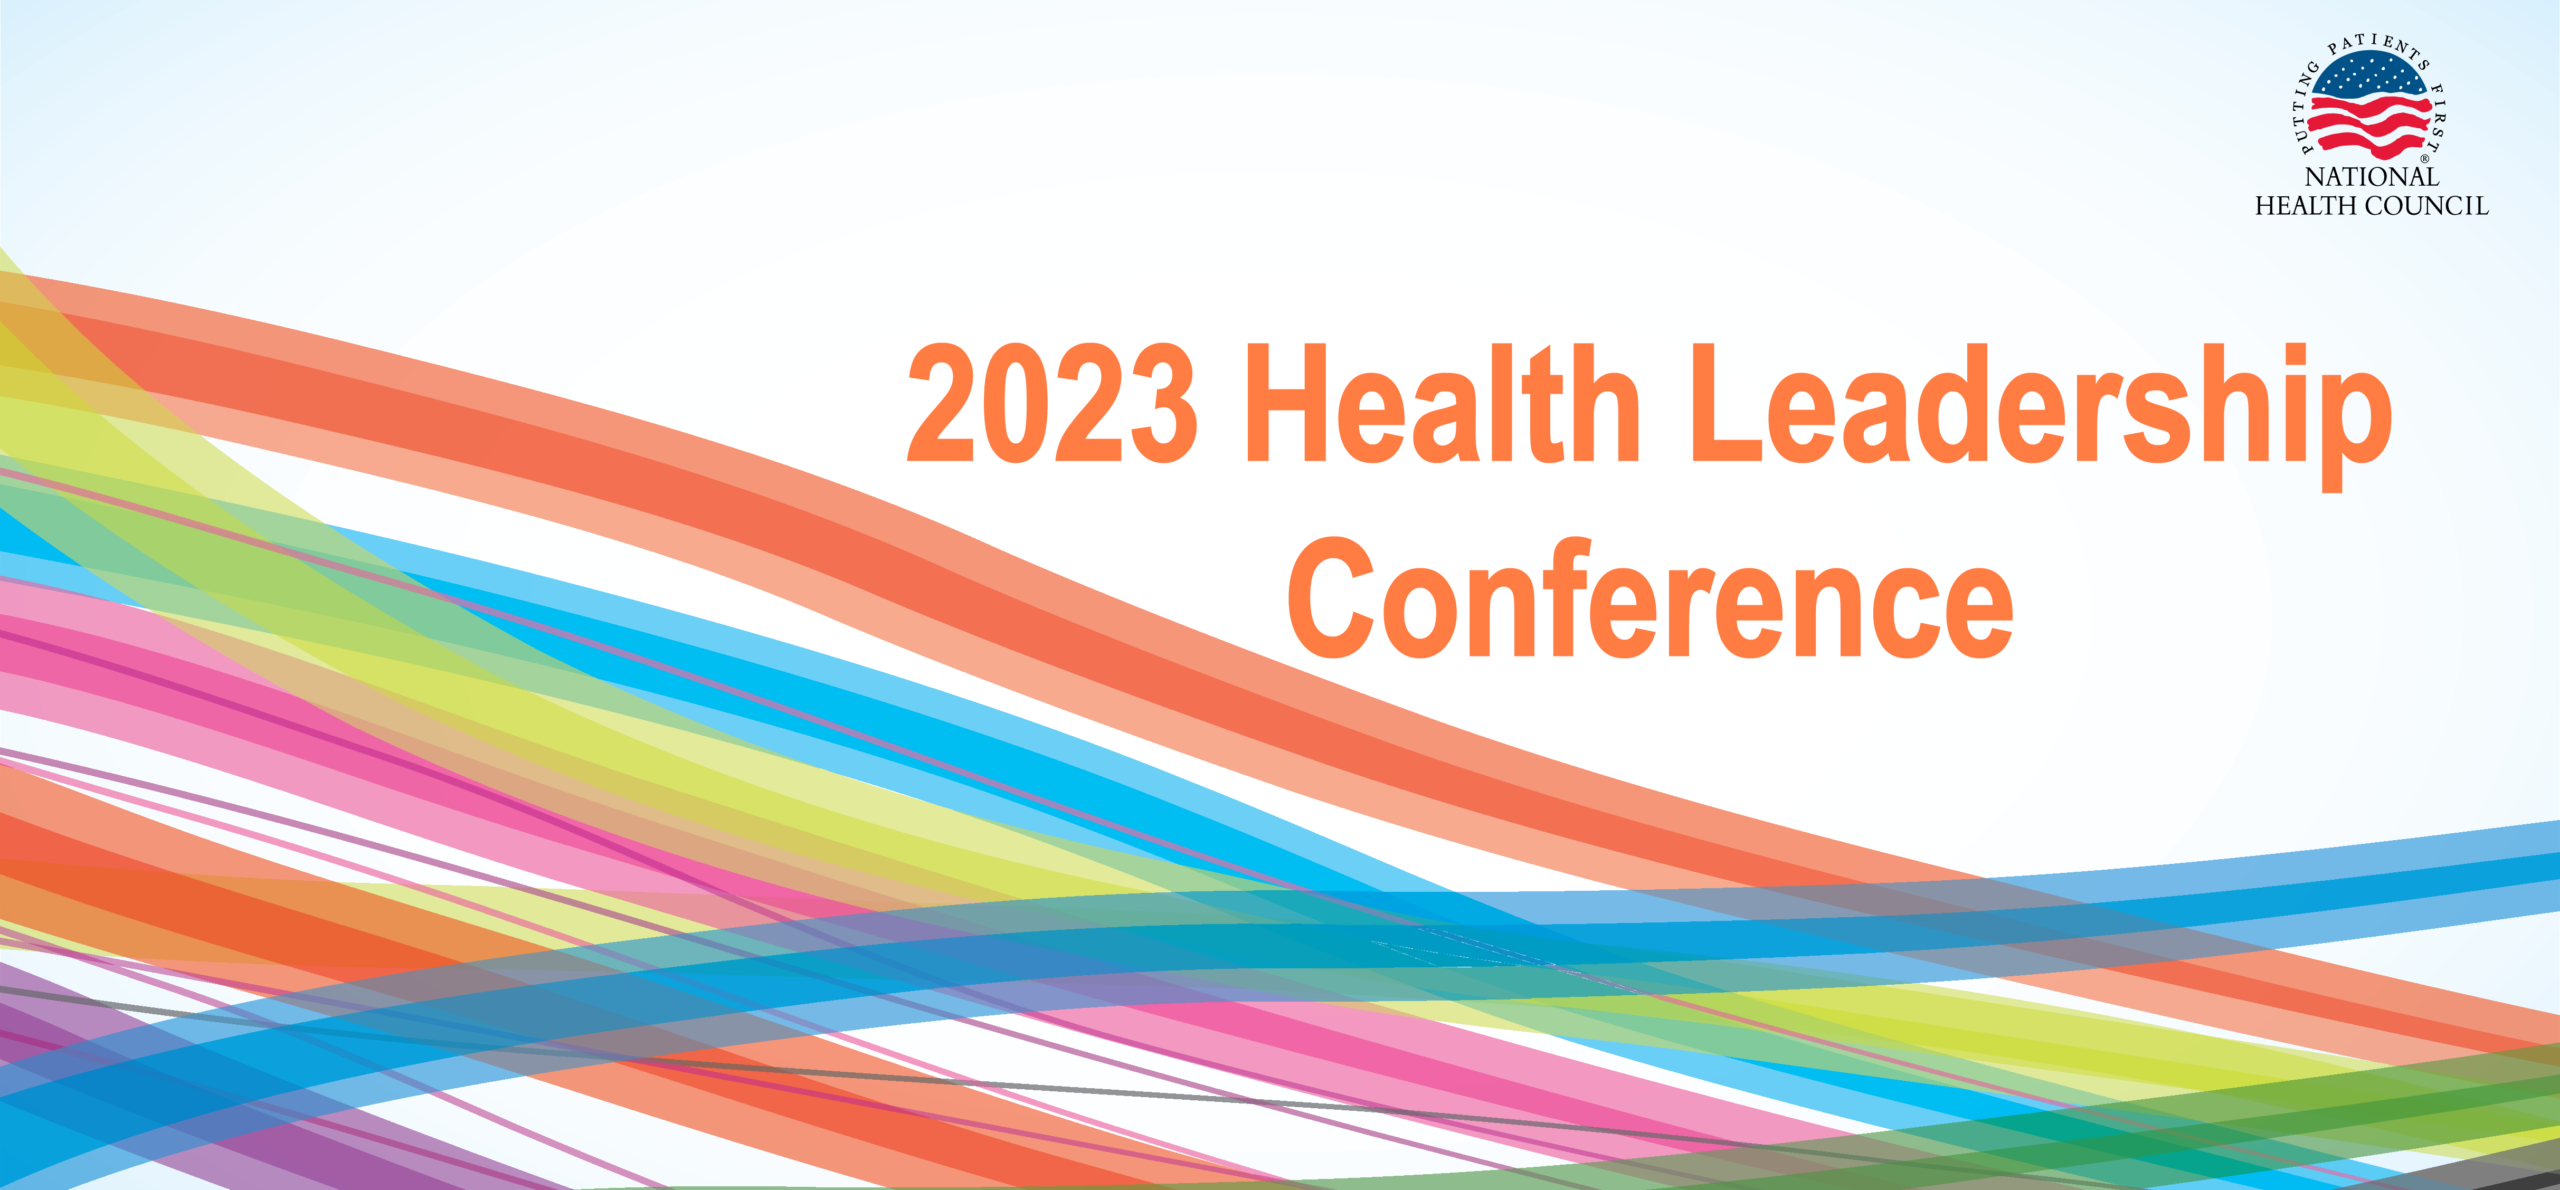 2023 Health Leadership Conference - National Health Council